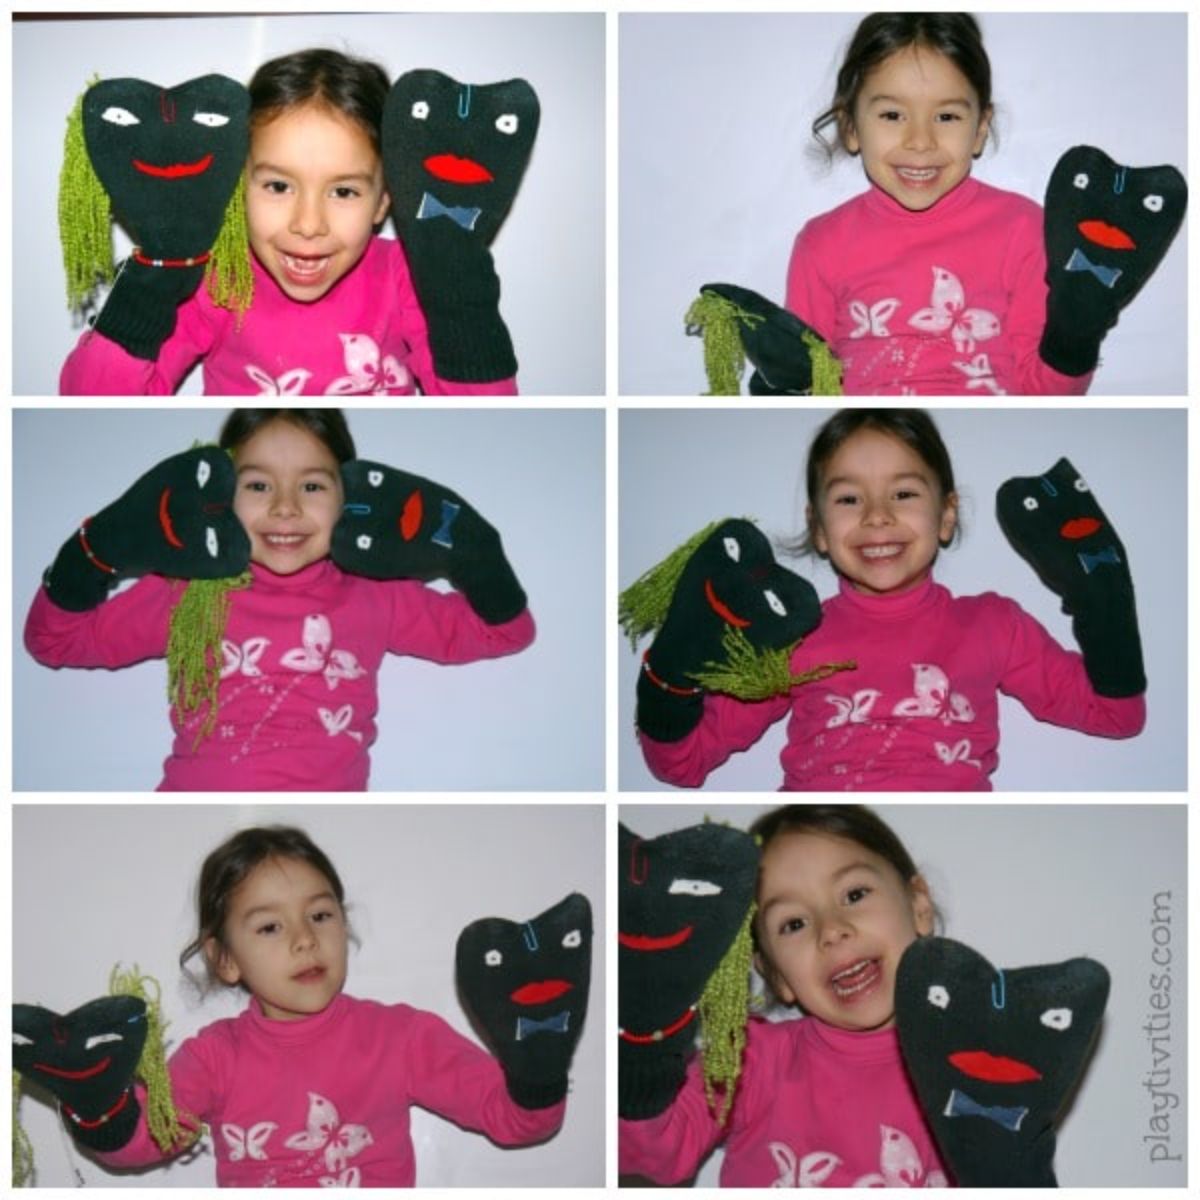 6 photos of the same girl in a pink shirt holding two black sock puppets